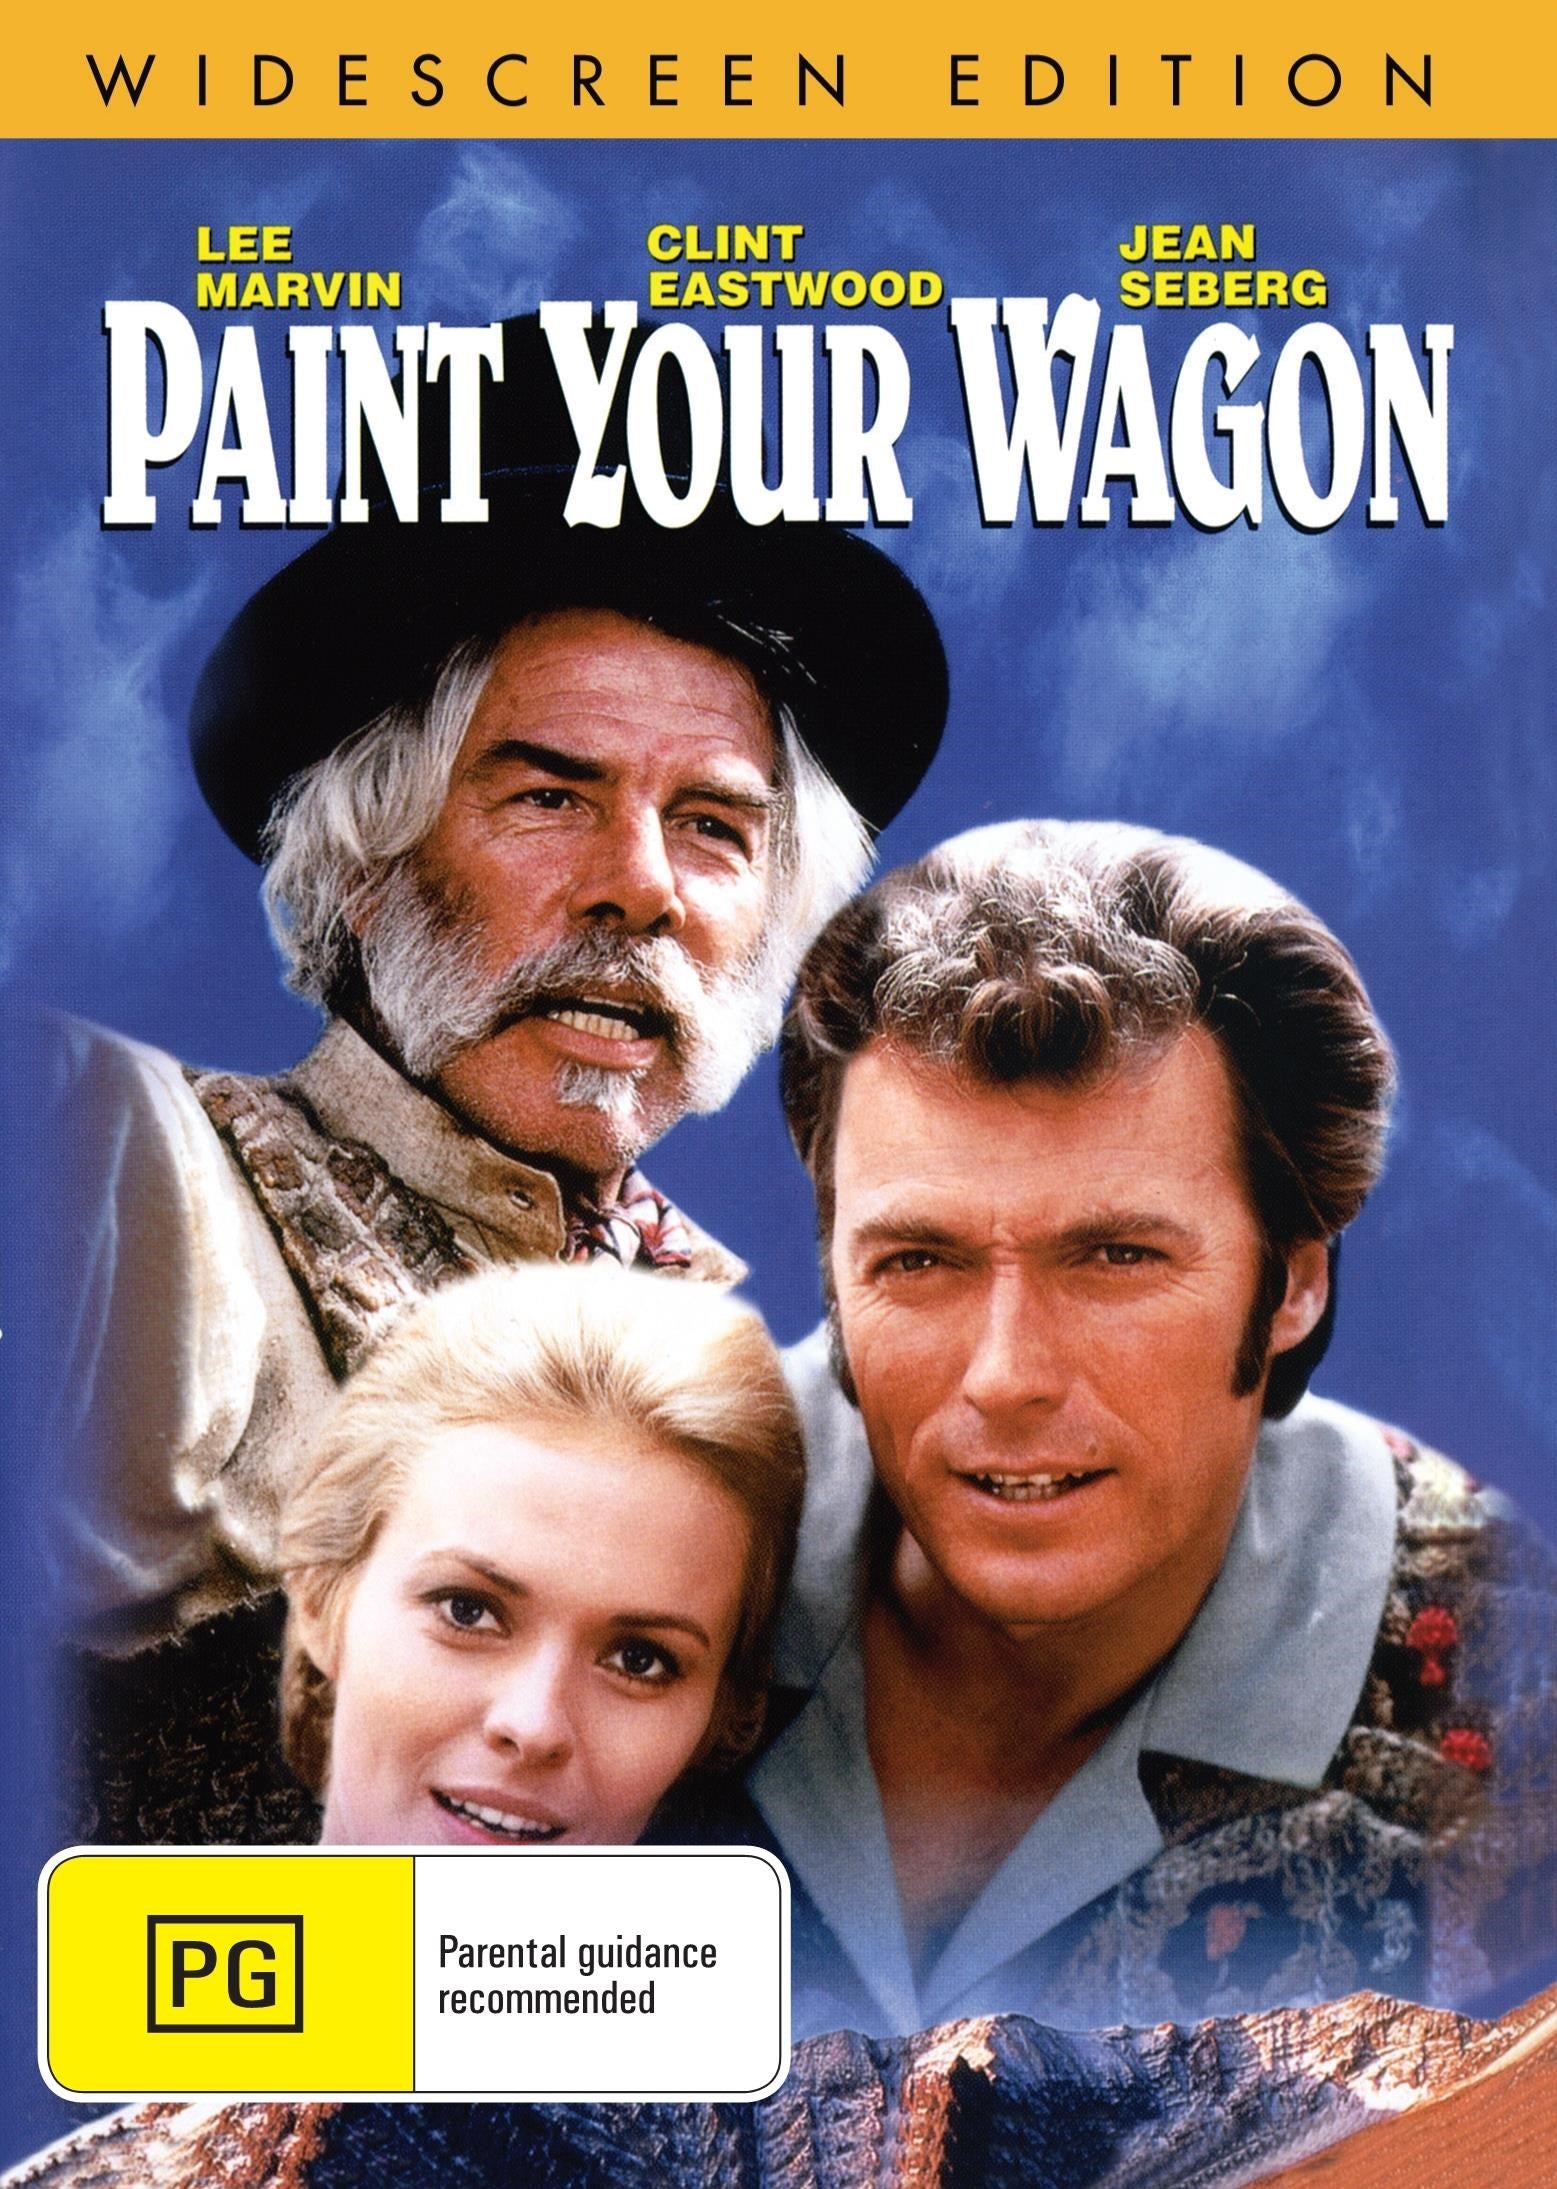 Paint Your Wagon rareandcollectibledvds